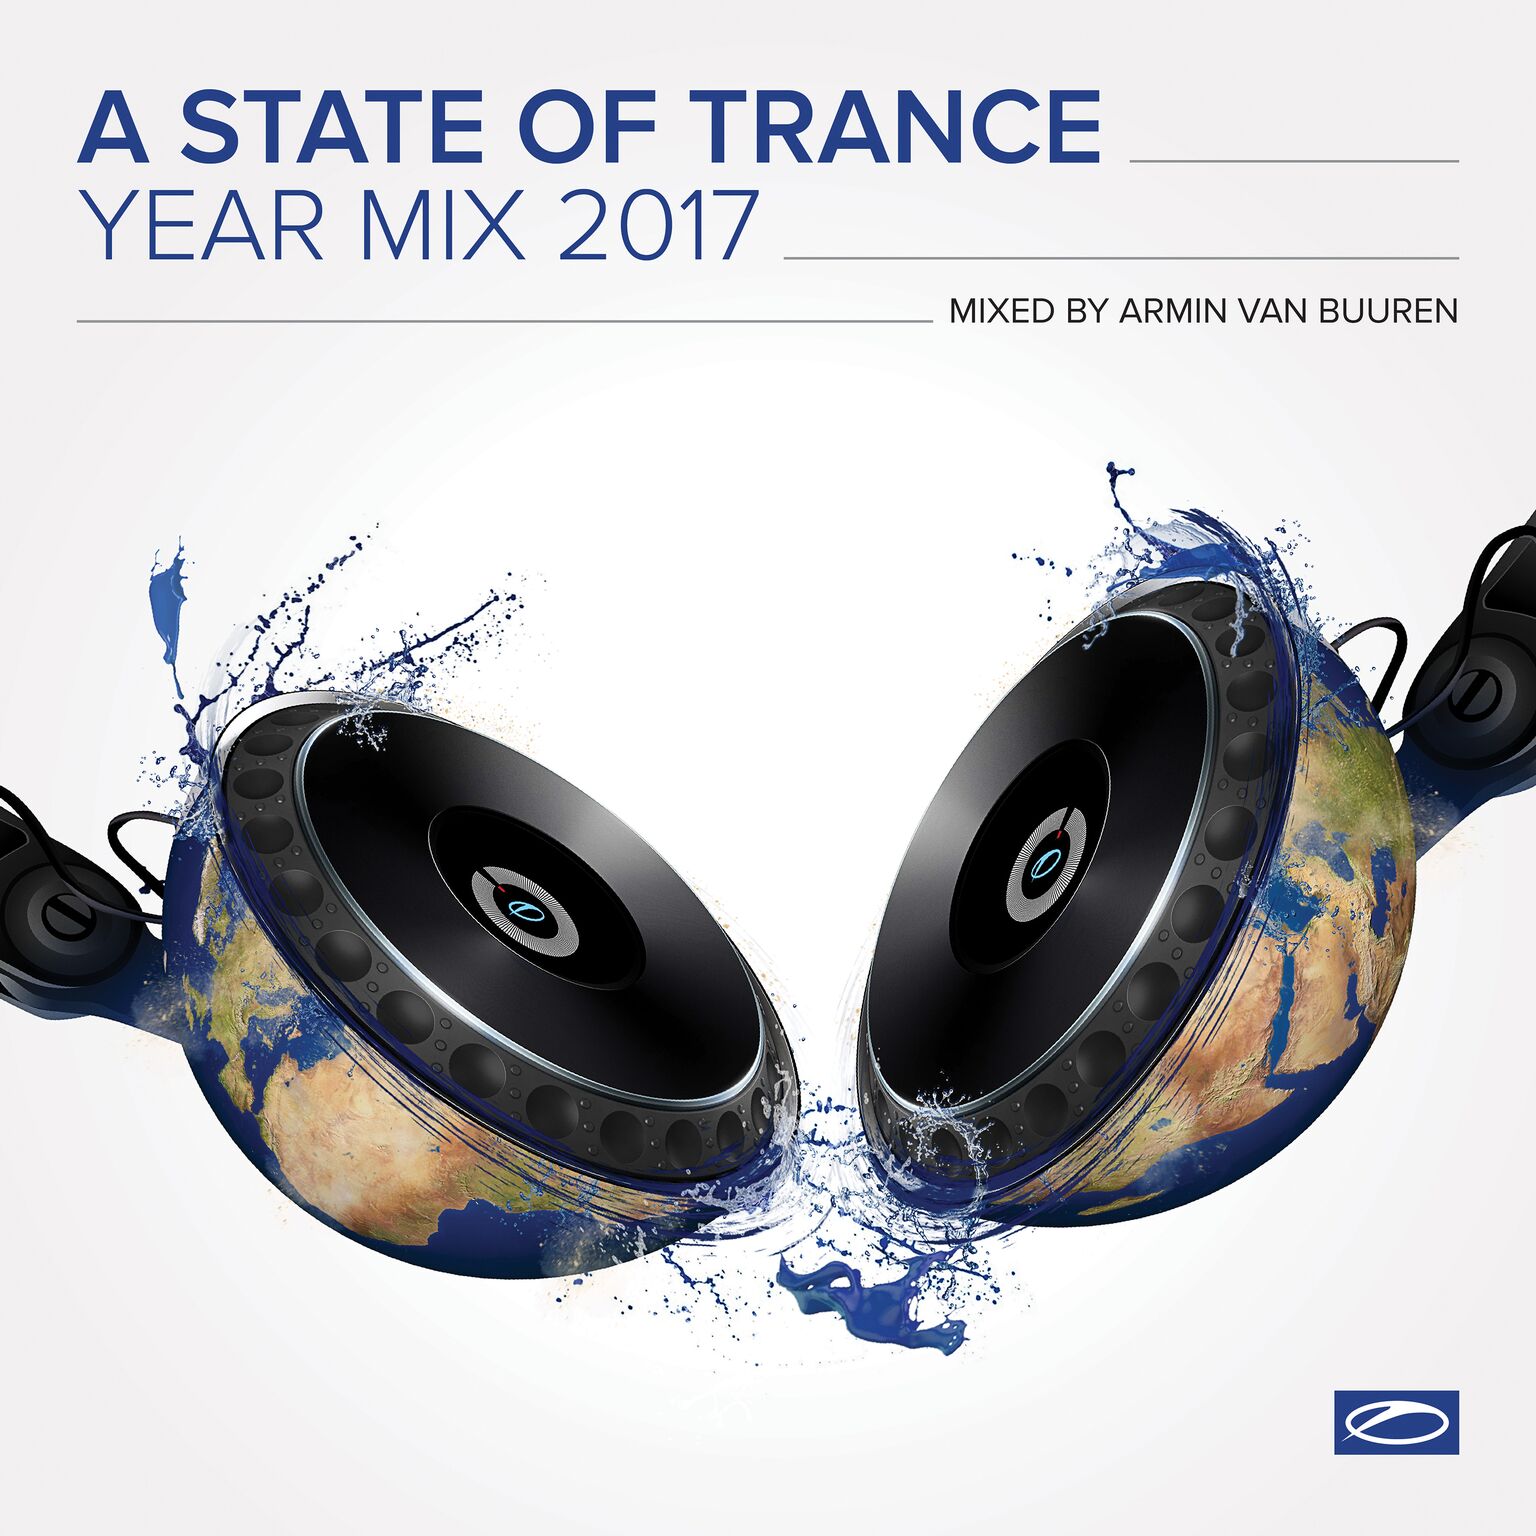 A State Of Trance Year Mix 2017 mixed by Armin van Buuren